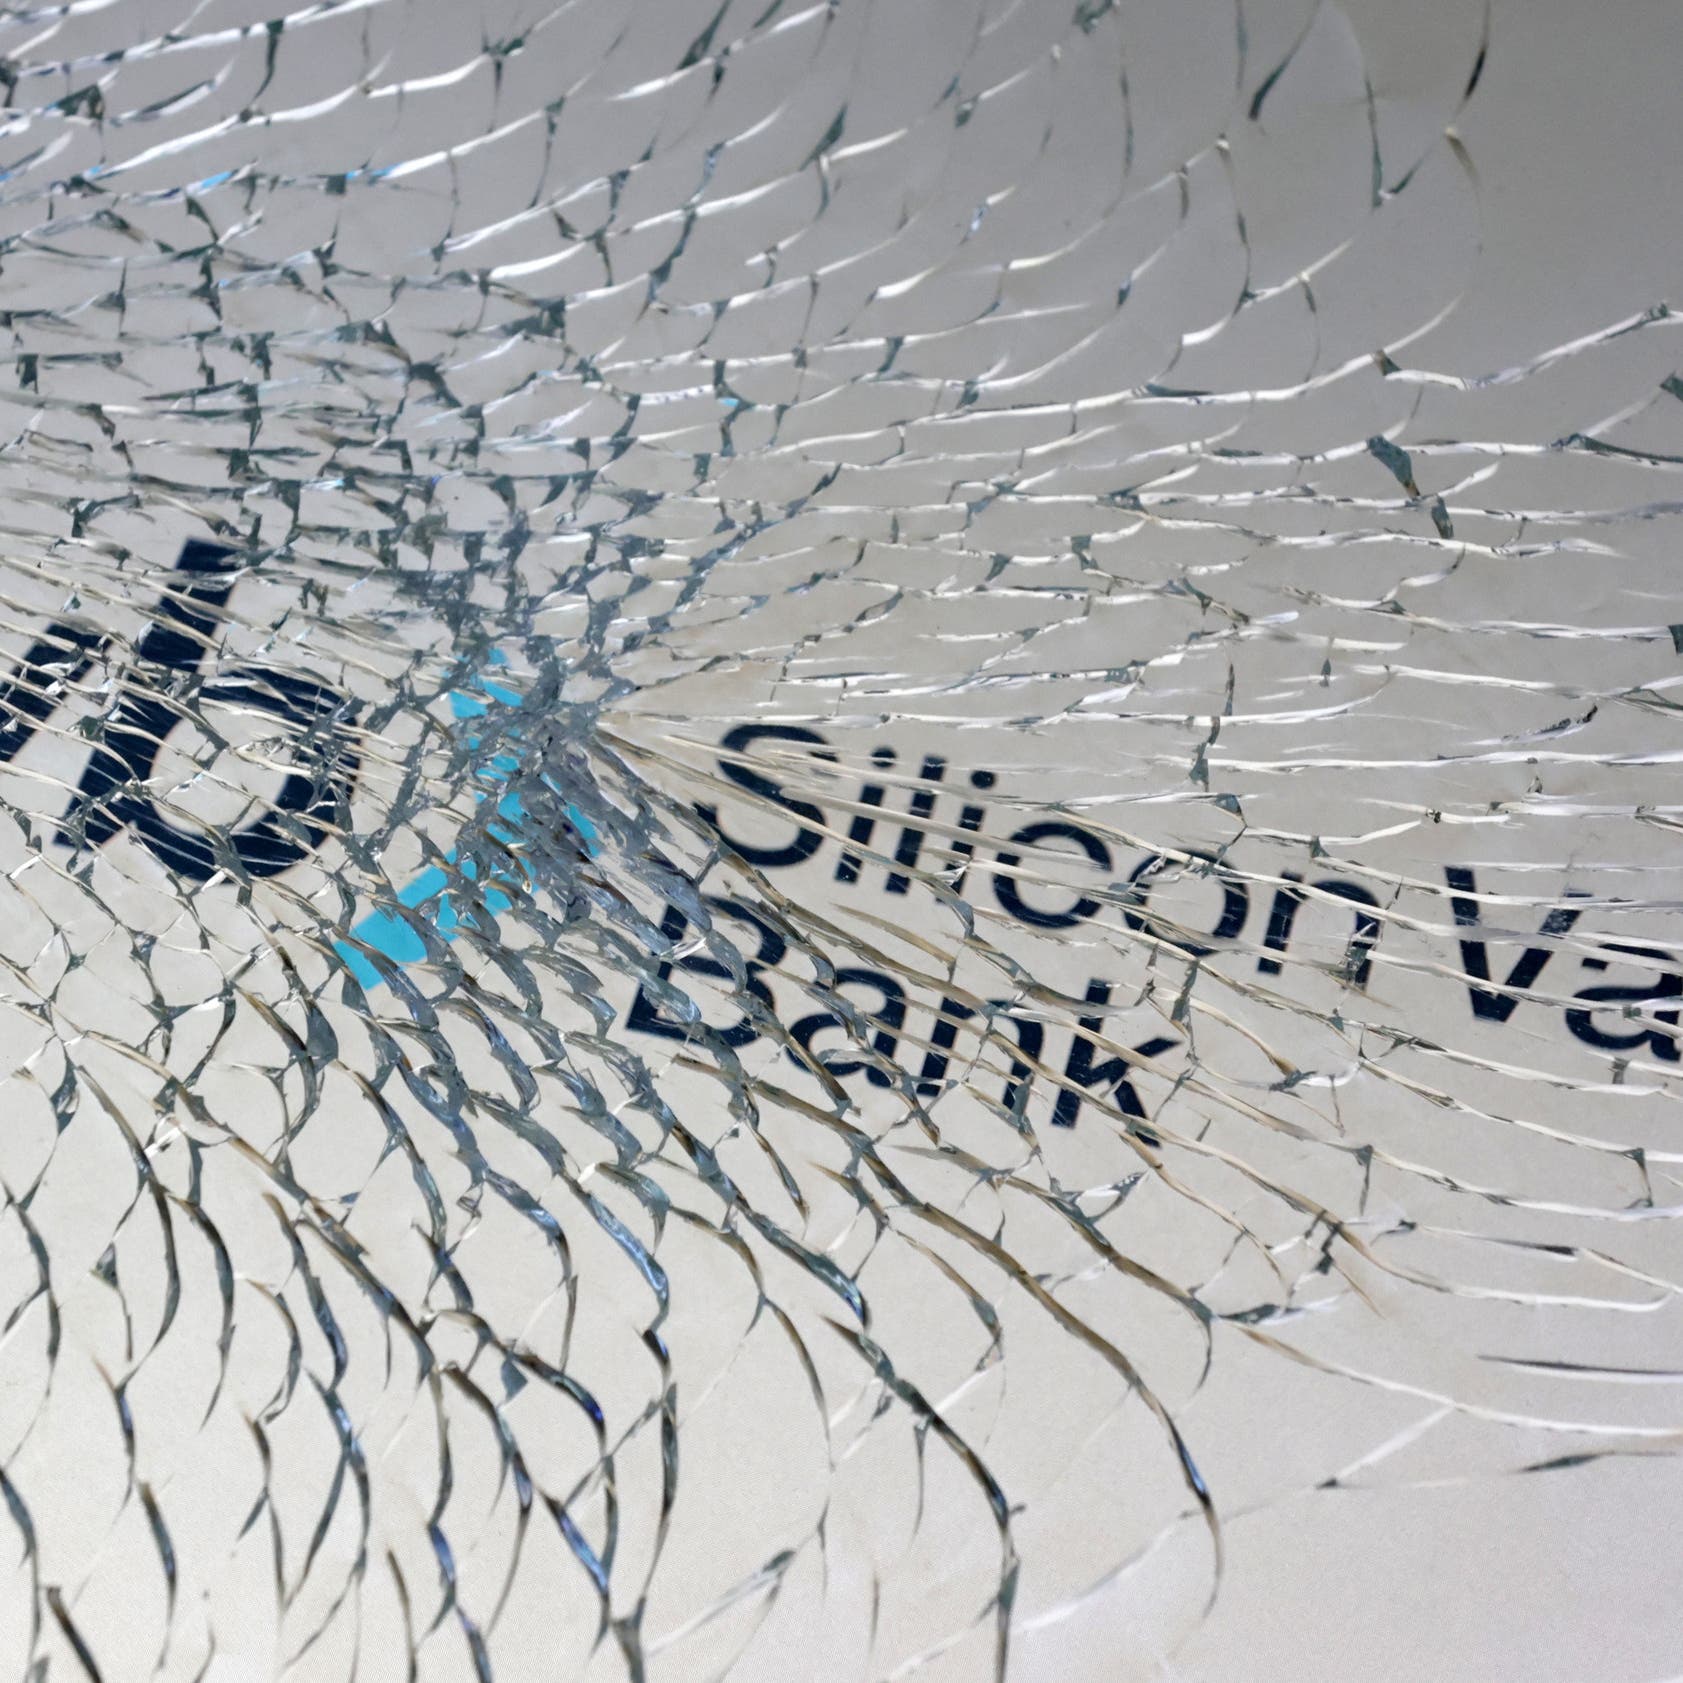 Silicon Valley Bank collapse: All you need to know